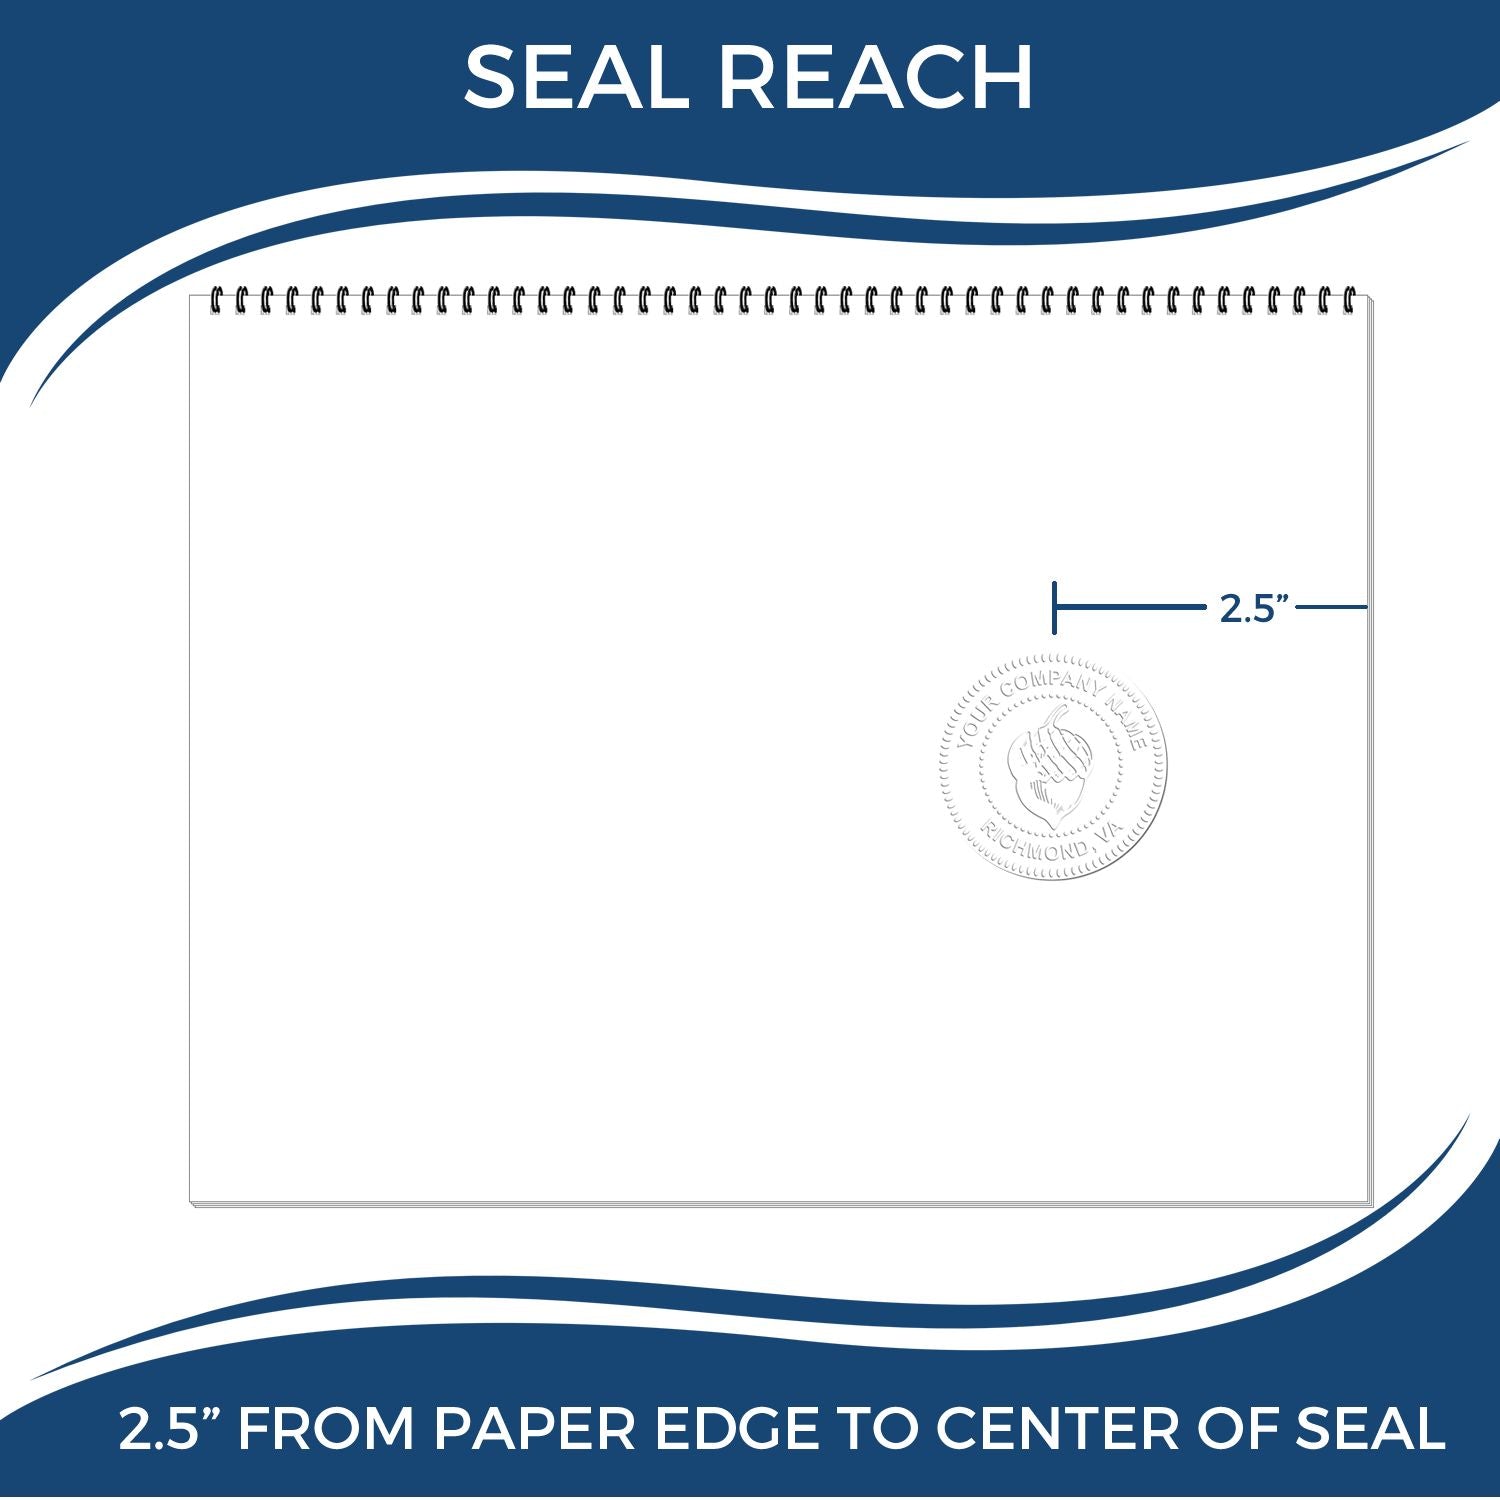 An infographic showing the seal reach which is represented by a ruler and a miniature seal image of the Long Reach Pennsylvania PE Seal